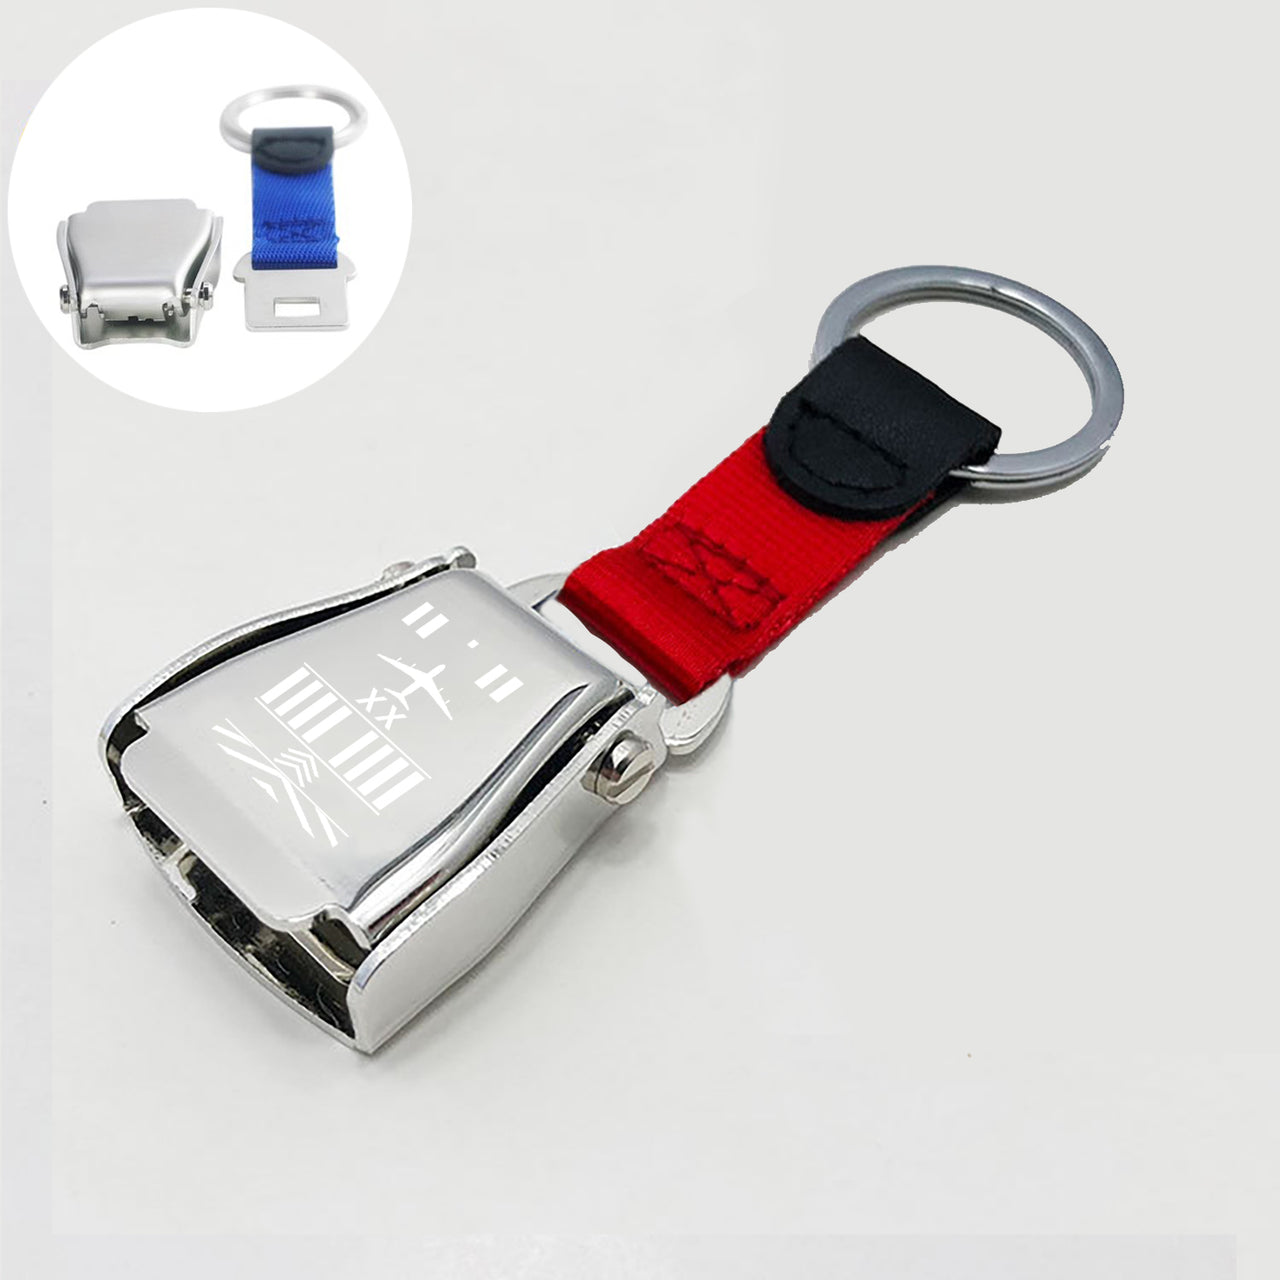 Products Runway (Customizable) Designed Airplane Seat Belt Key Chains